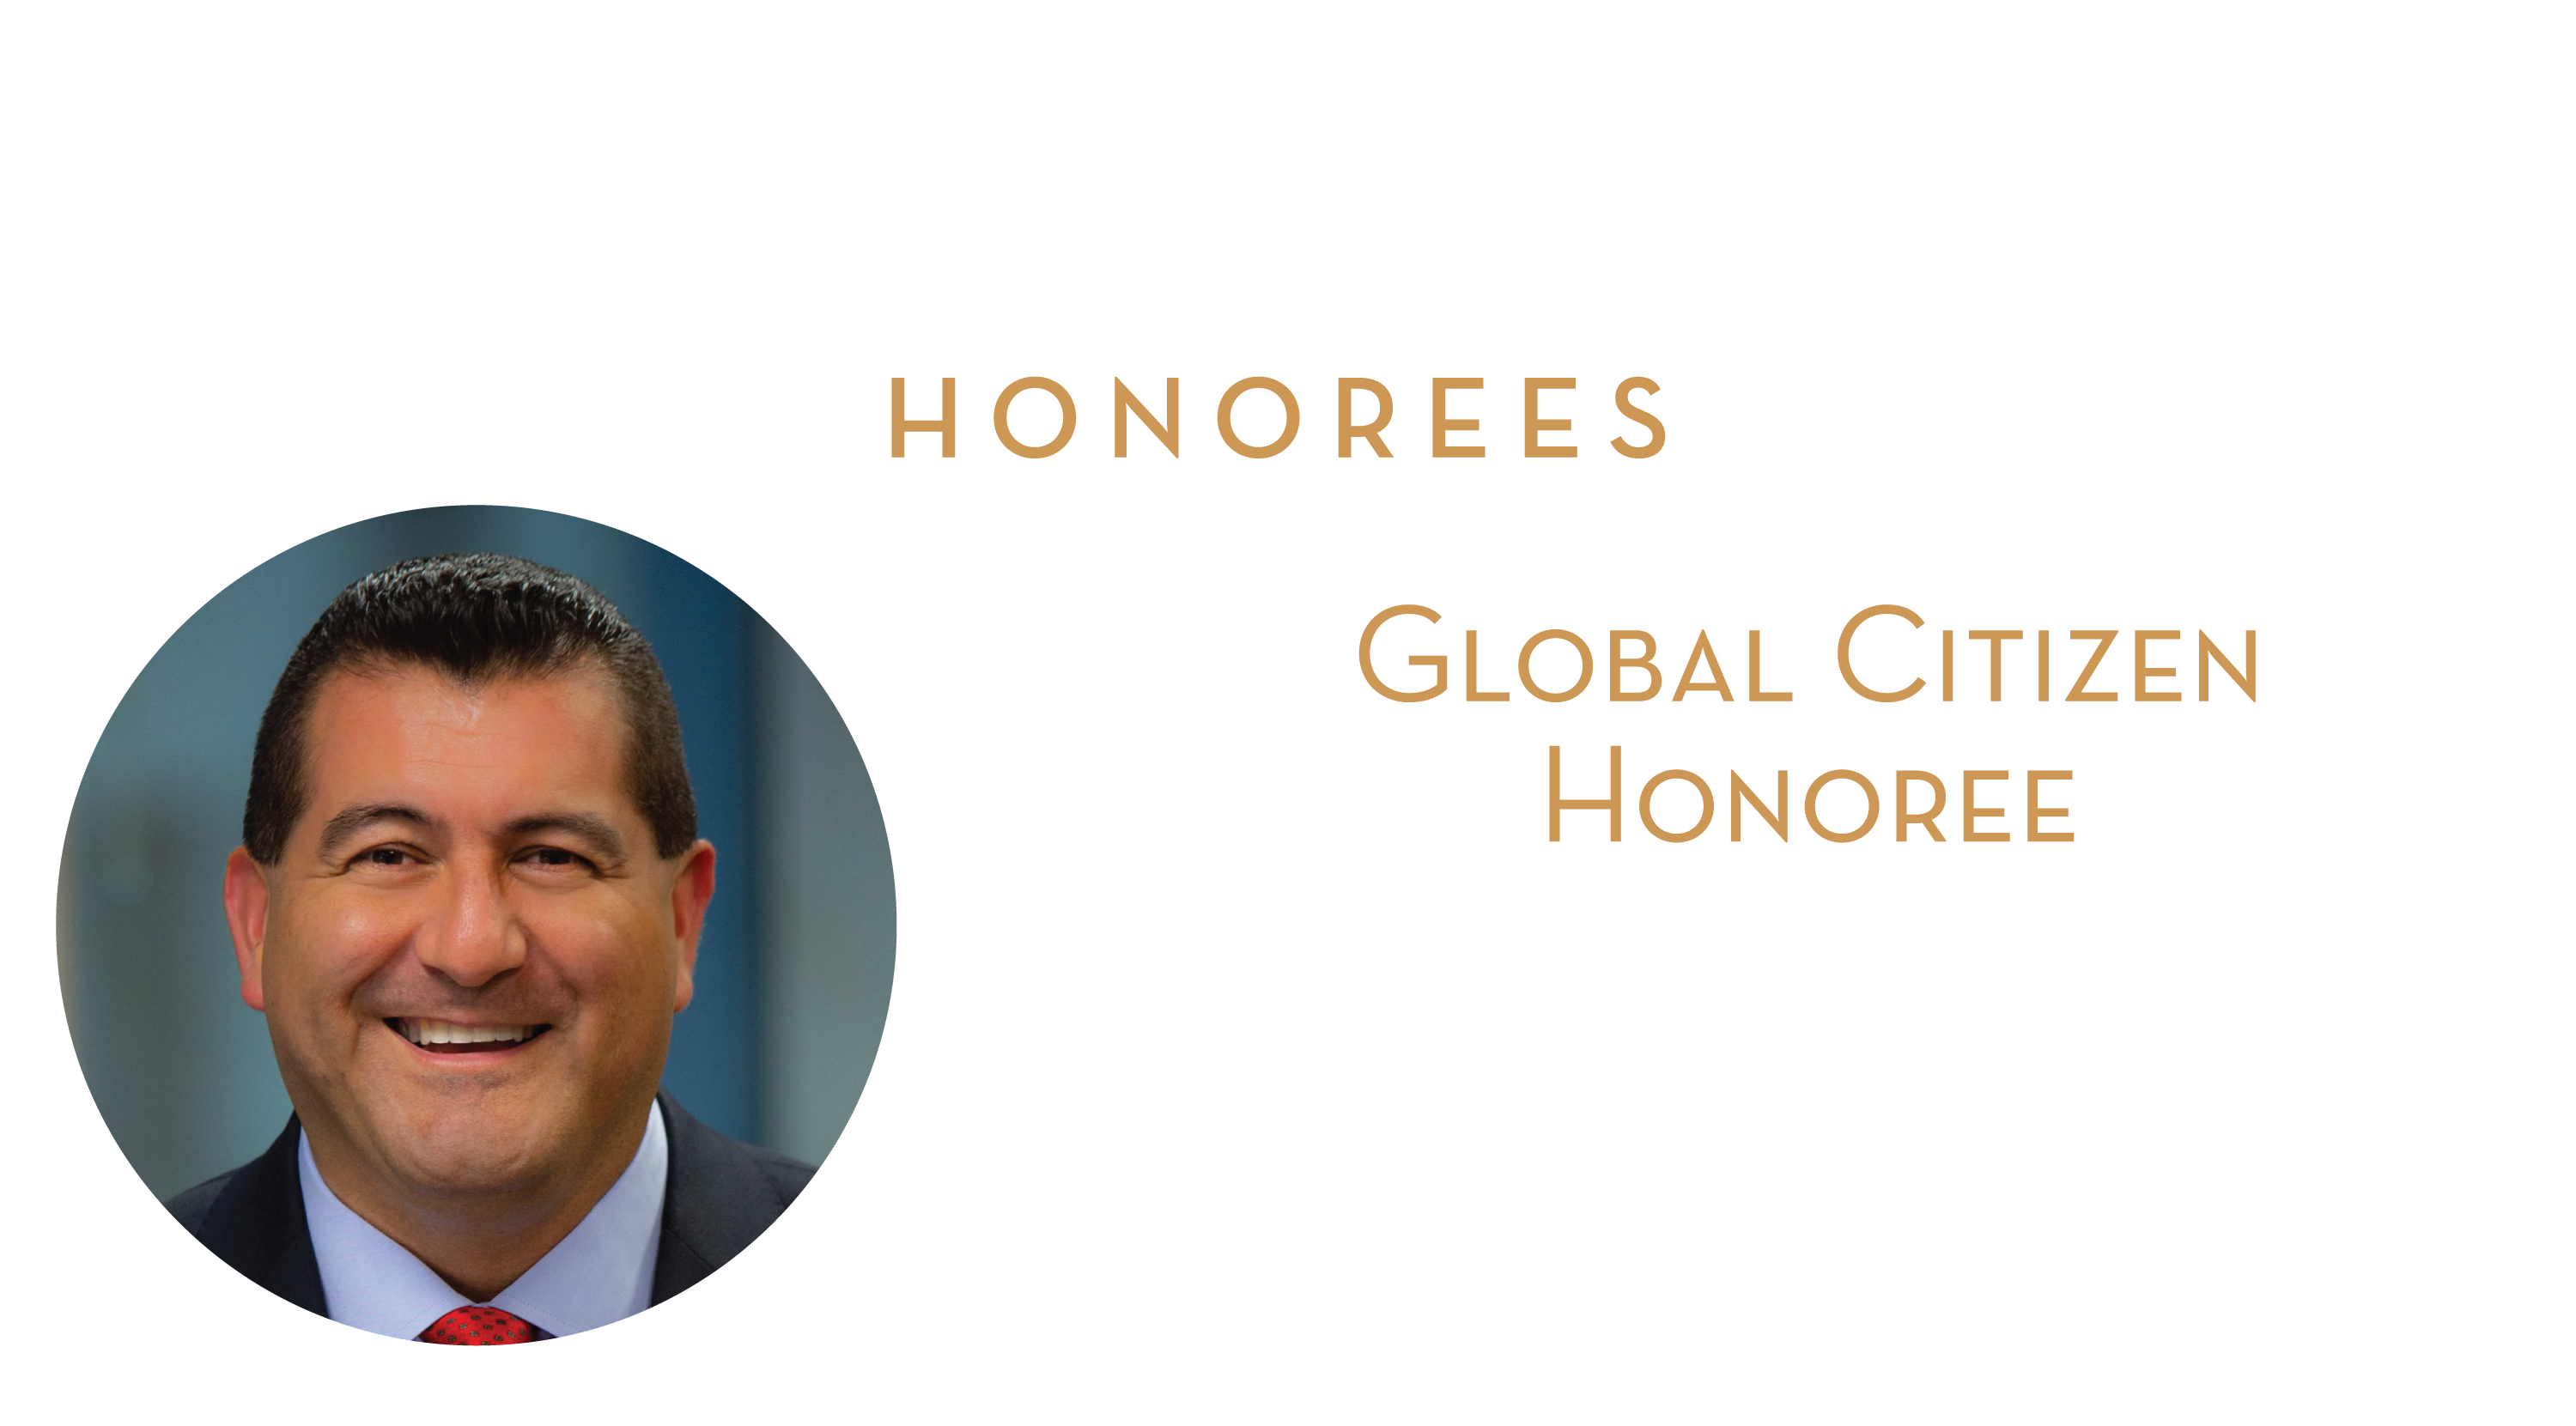 Honorees global citizen honoree Martin Cabrera founder & chief executive office Cabrera Capital markets 